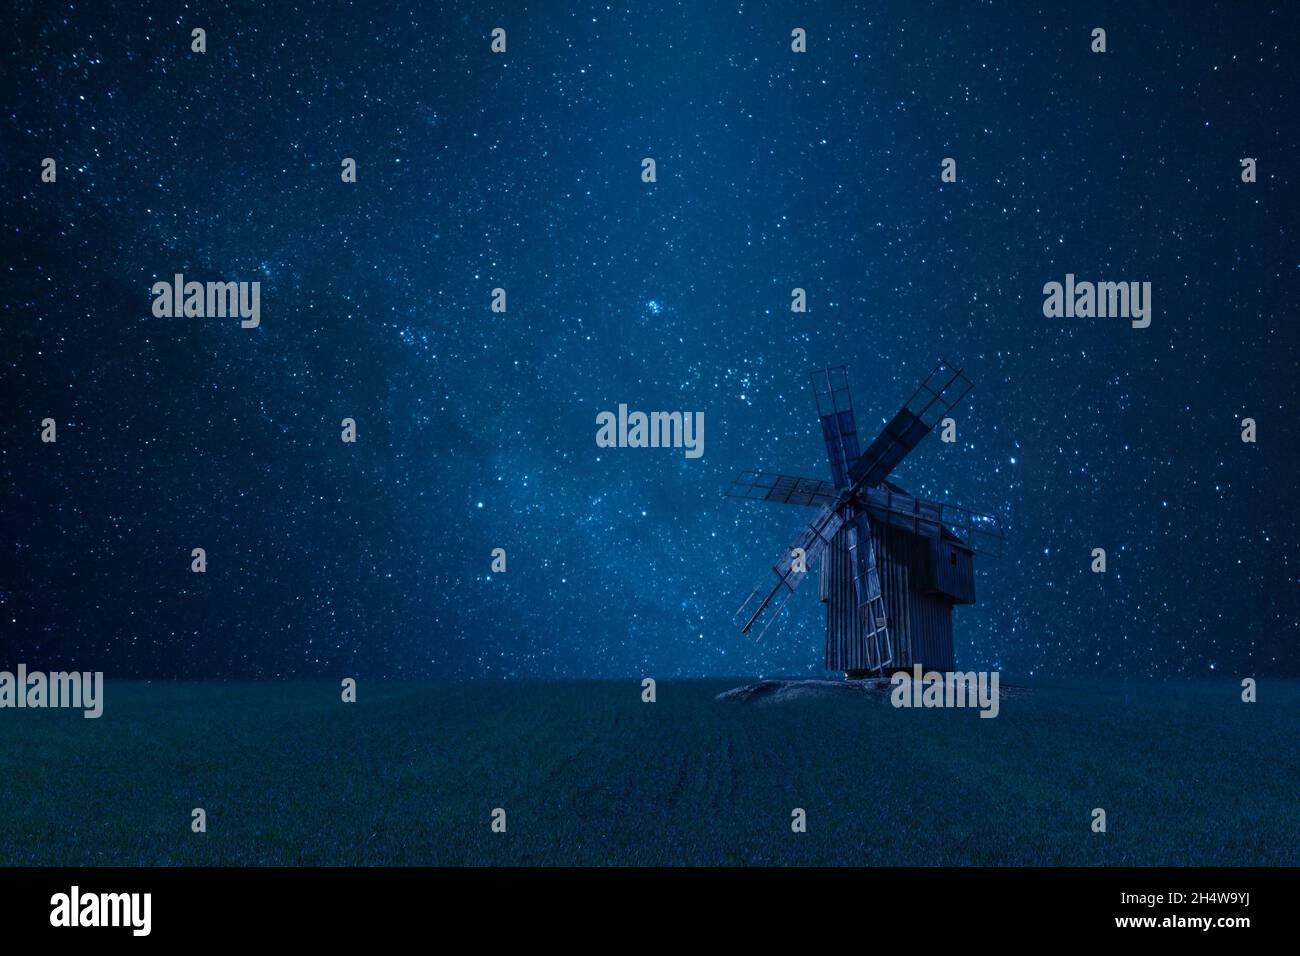 Night landscape with old windmill in field, bright stars in sky, endless galaxy Stock Photo